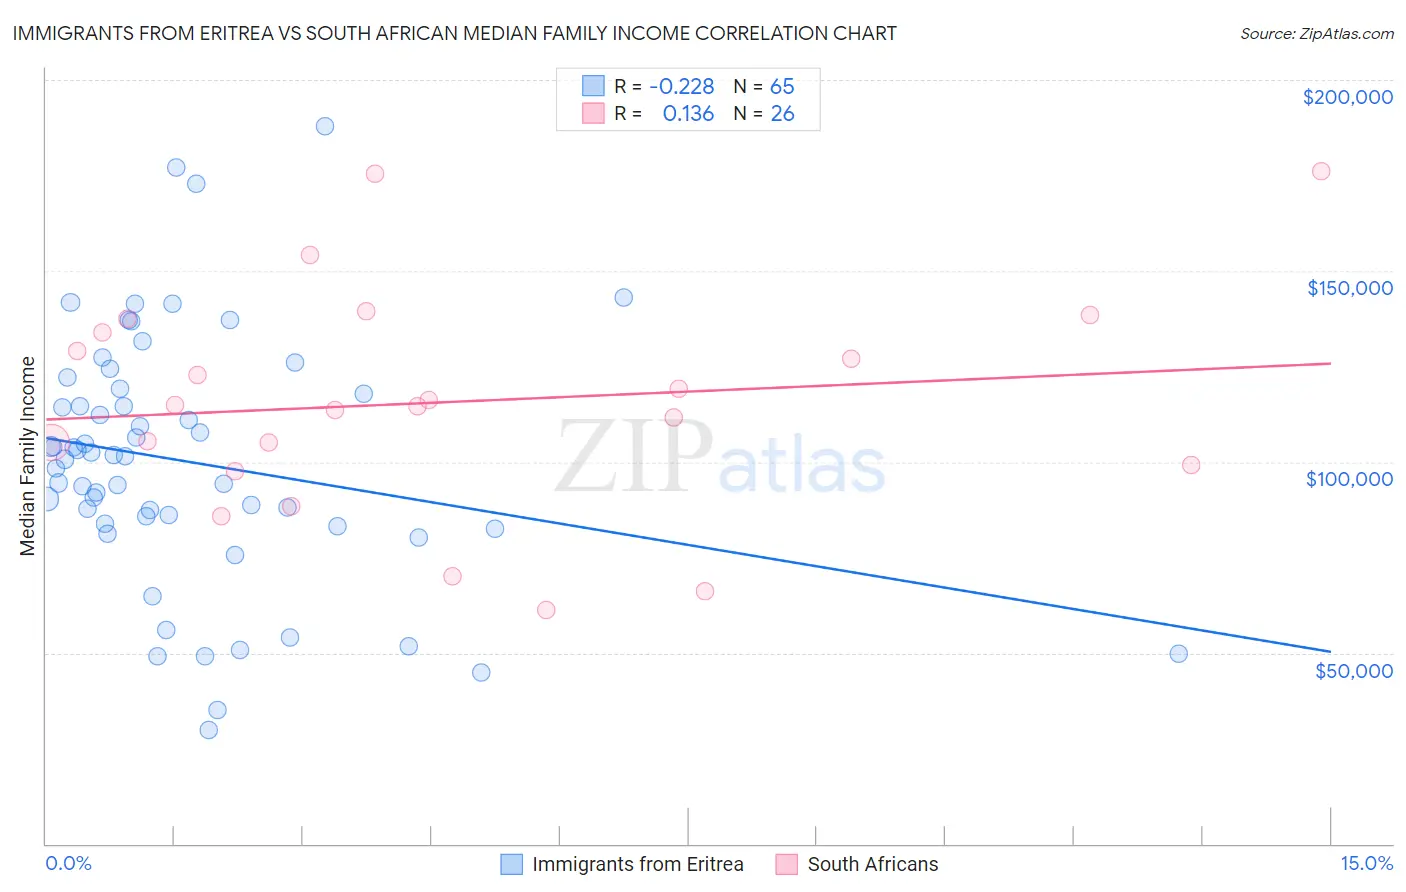 Immigrants from Eritrea vs South African Median Family Income